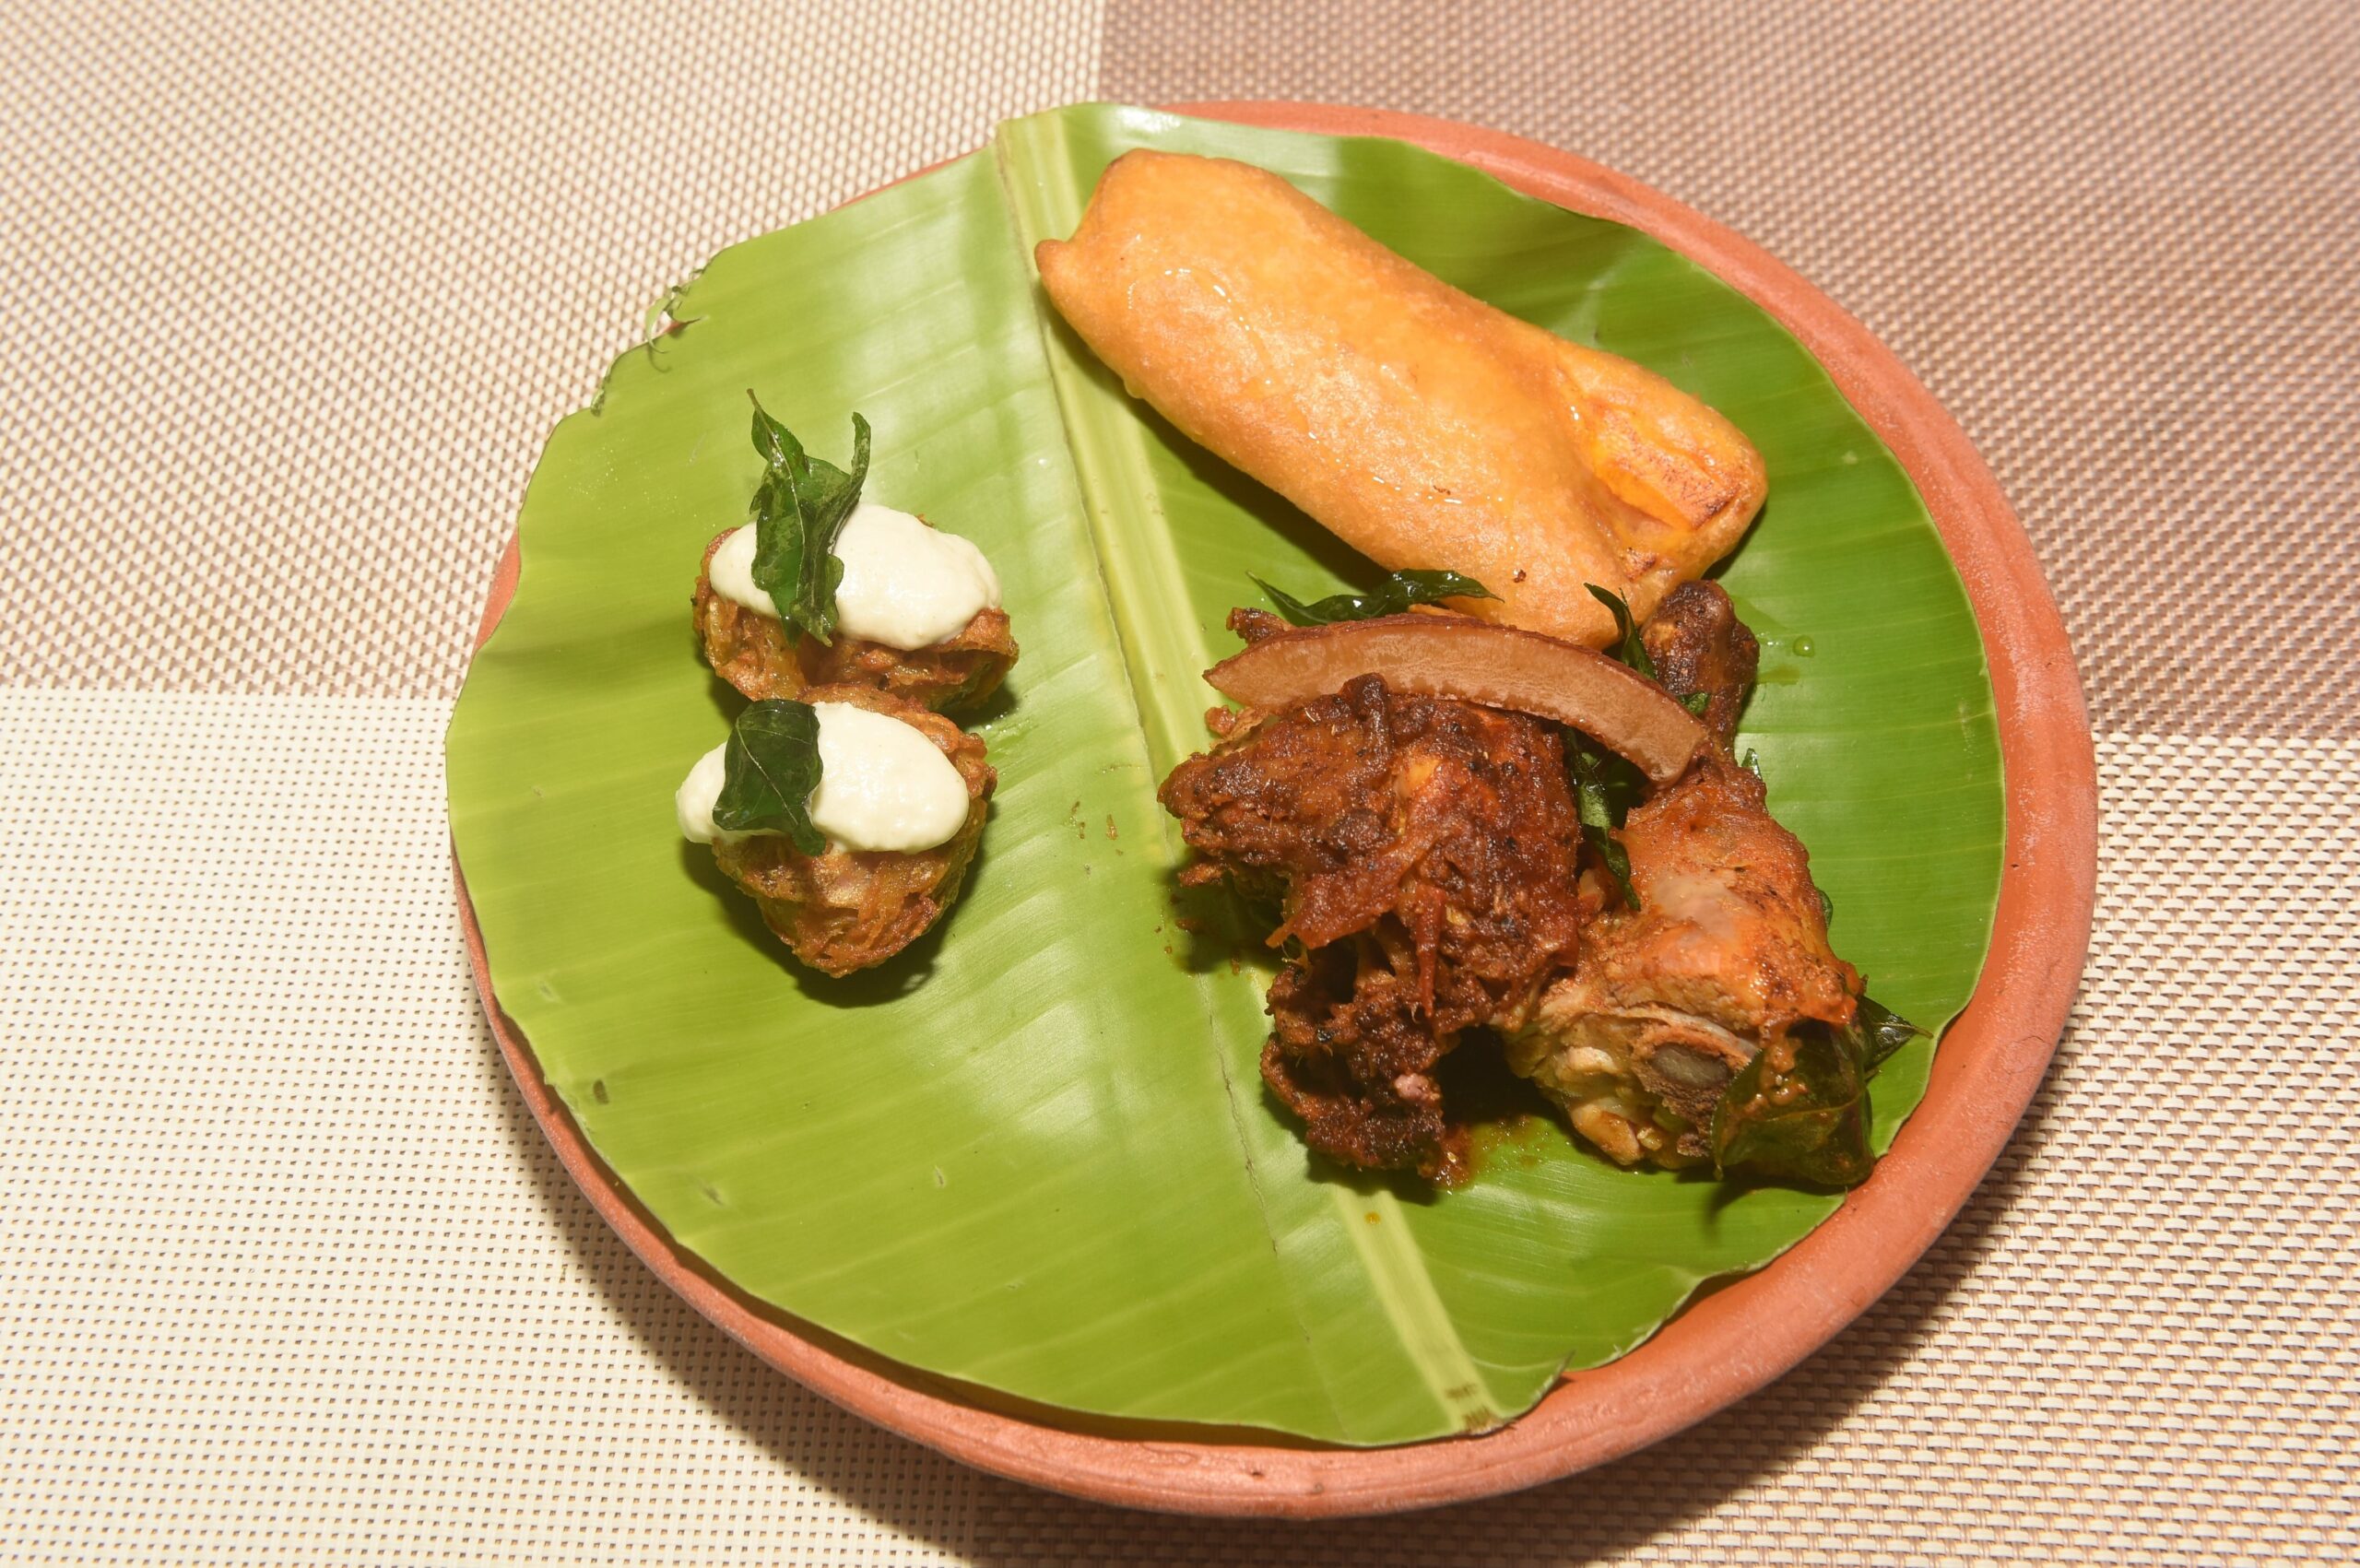 Novotel Chennai Chamiers Road exclusively kickstarts the ‘Flavours of Kerala’ Food Festival